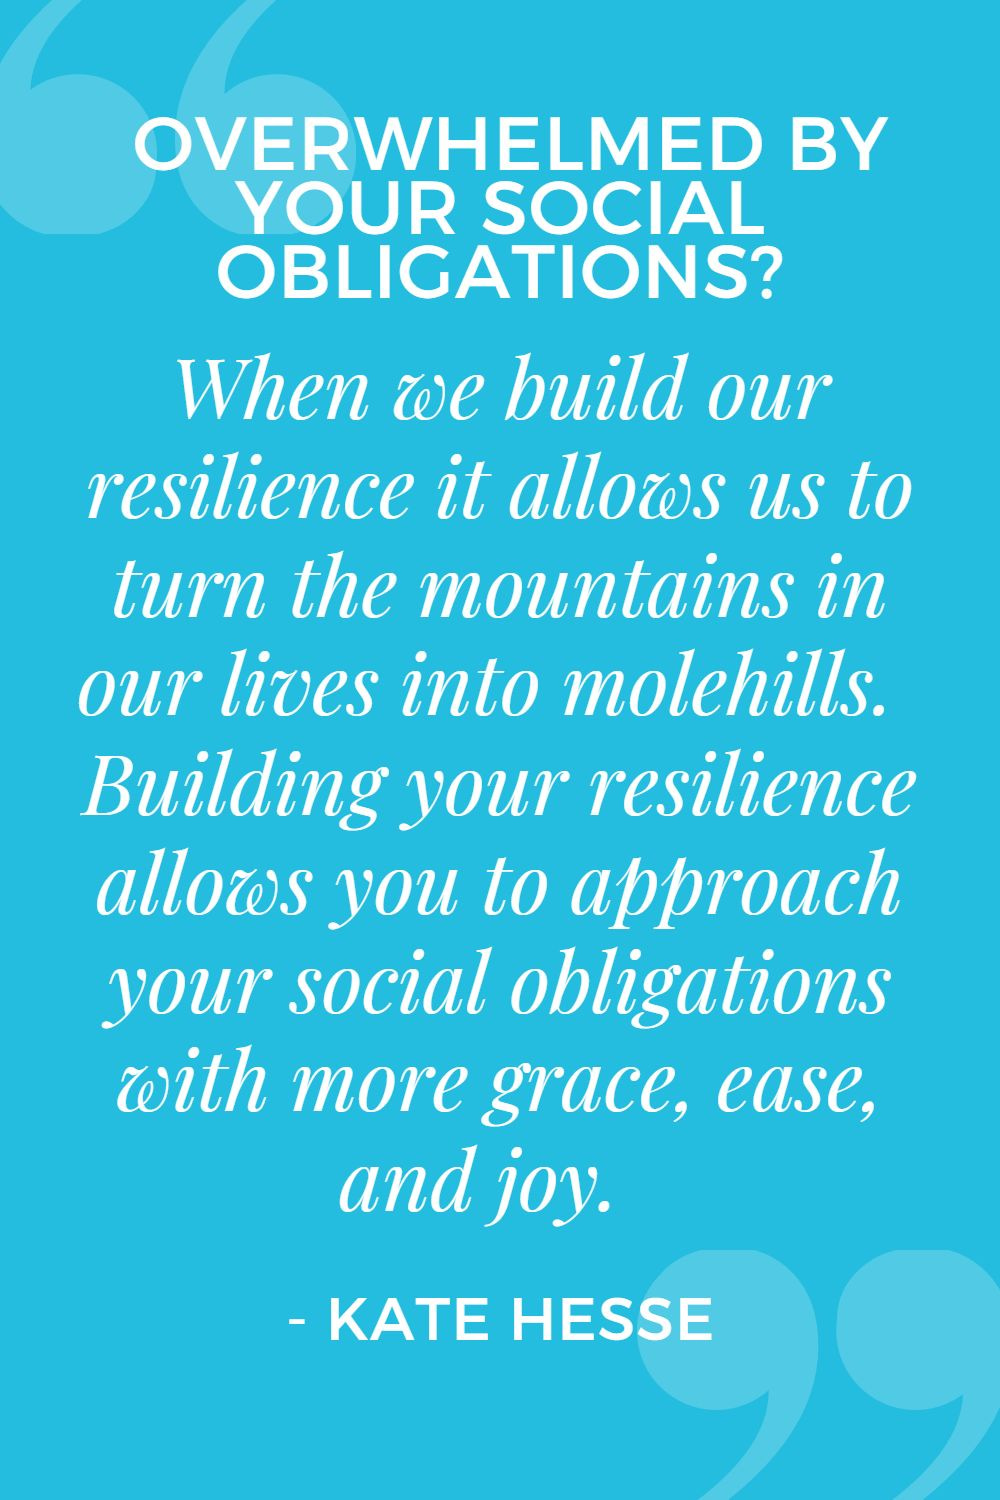 When we build our resilience it allows us to turn the mountains in our lives into molehills. Building your resilience allows you to approach your social obligations with more grace, ease, and joy!